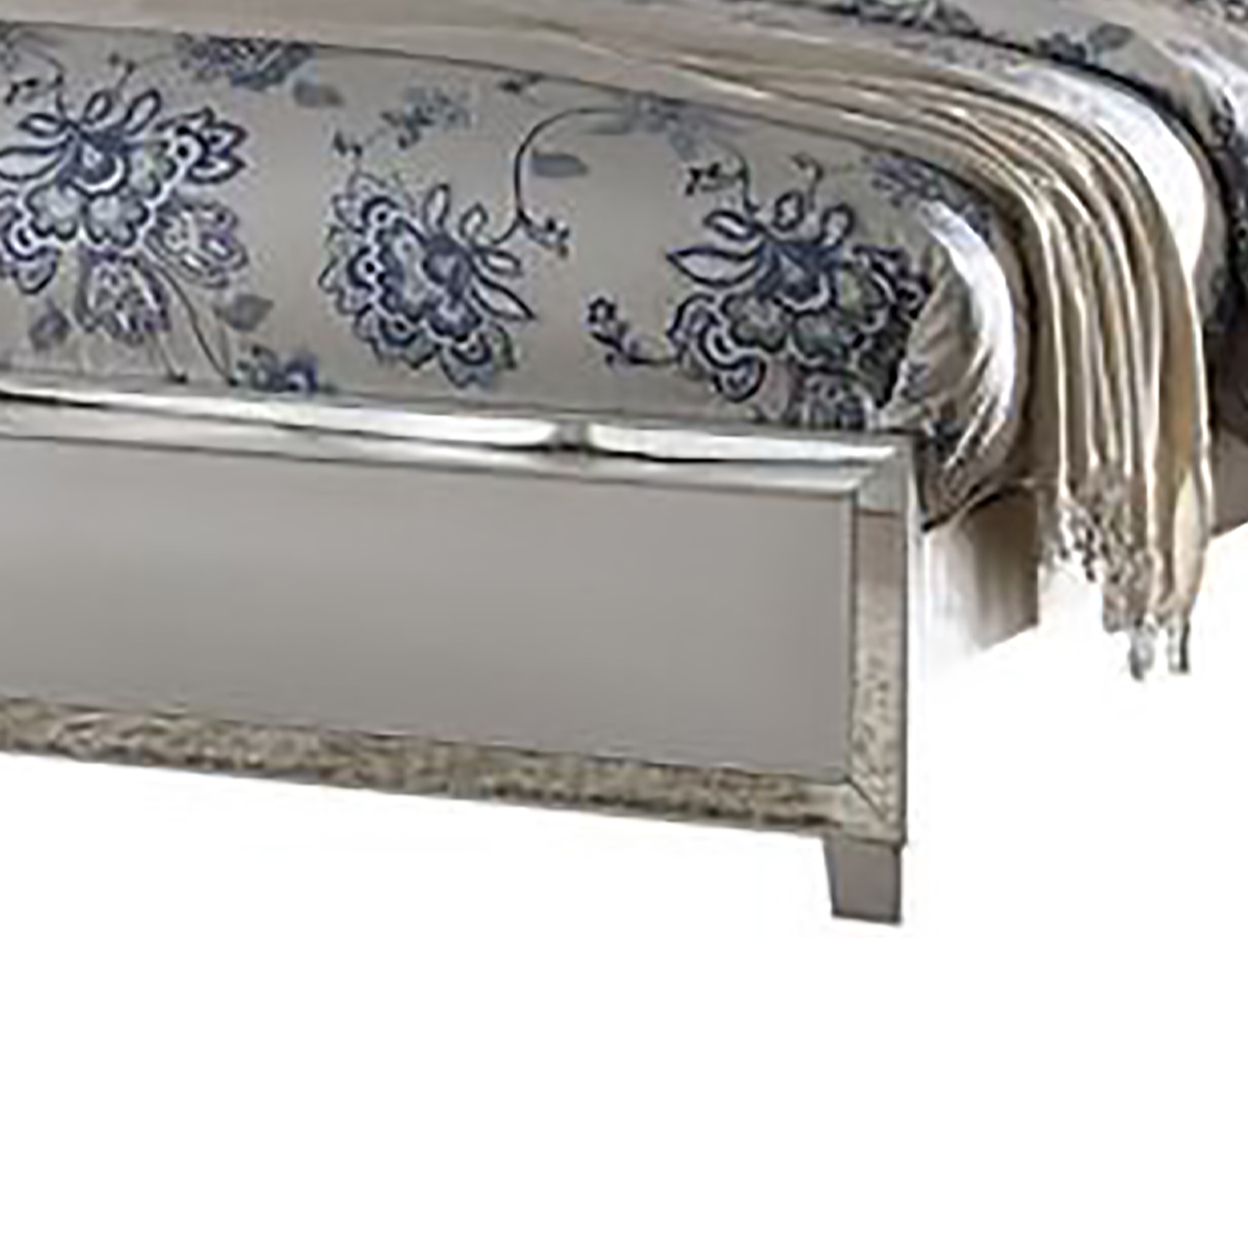 Stylish And Deluxe Queen Size Panel Bed, Silver- Saltoro Sherpi